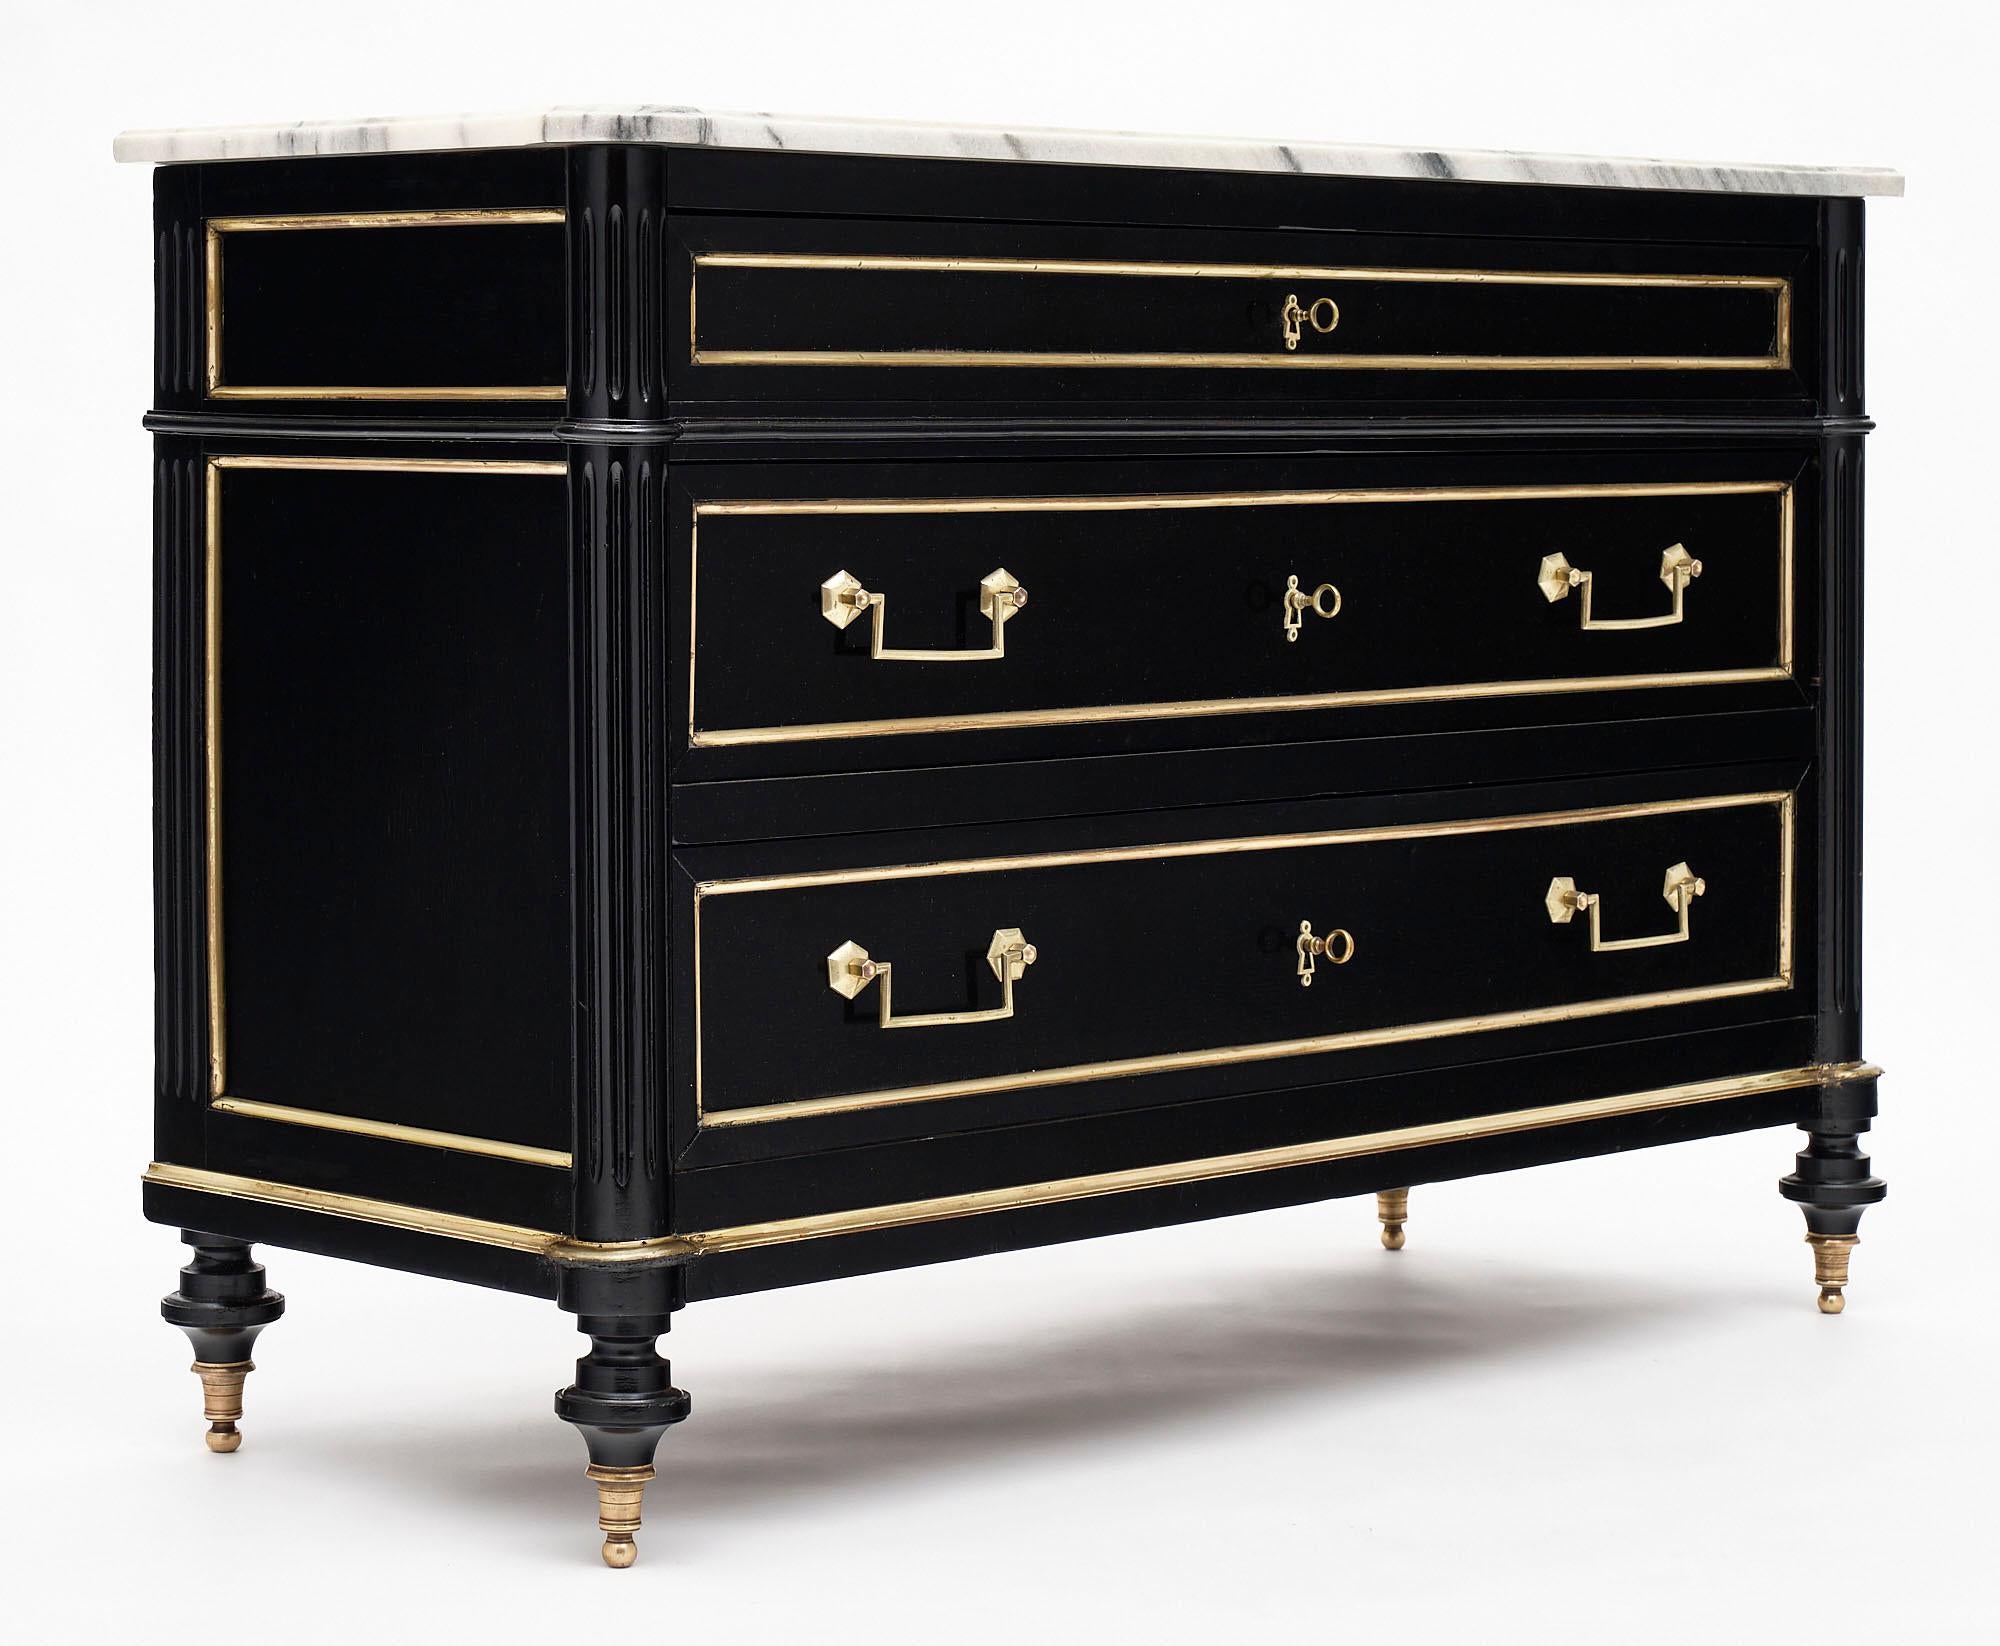 Louis XVI style chest of drawers from France made of mahogany that has been ebonized and finished with a lustrous museum-quality French polish. We love the toupies legs and intact Carrara marble top. There is gilt brass trim throughout.